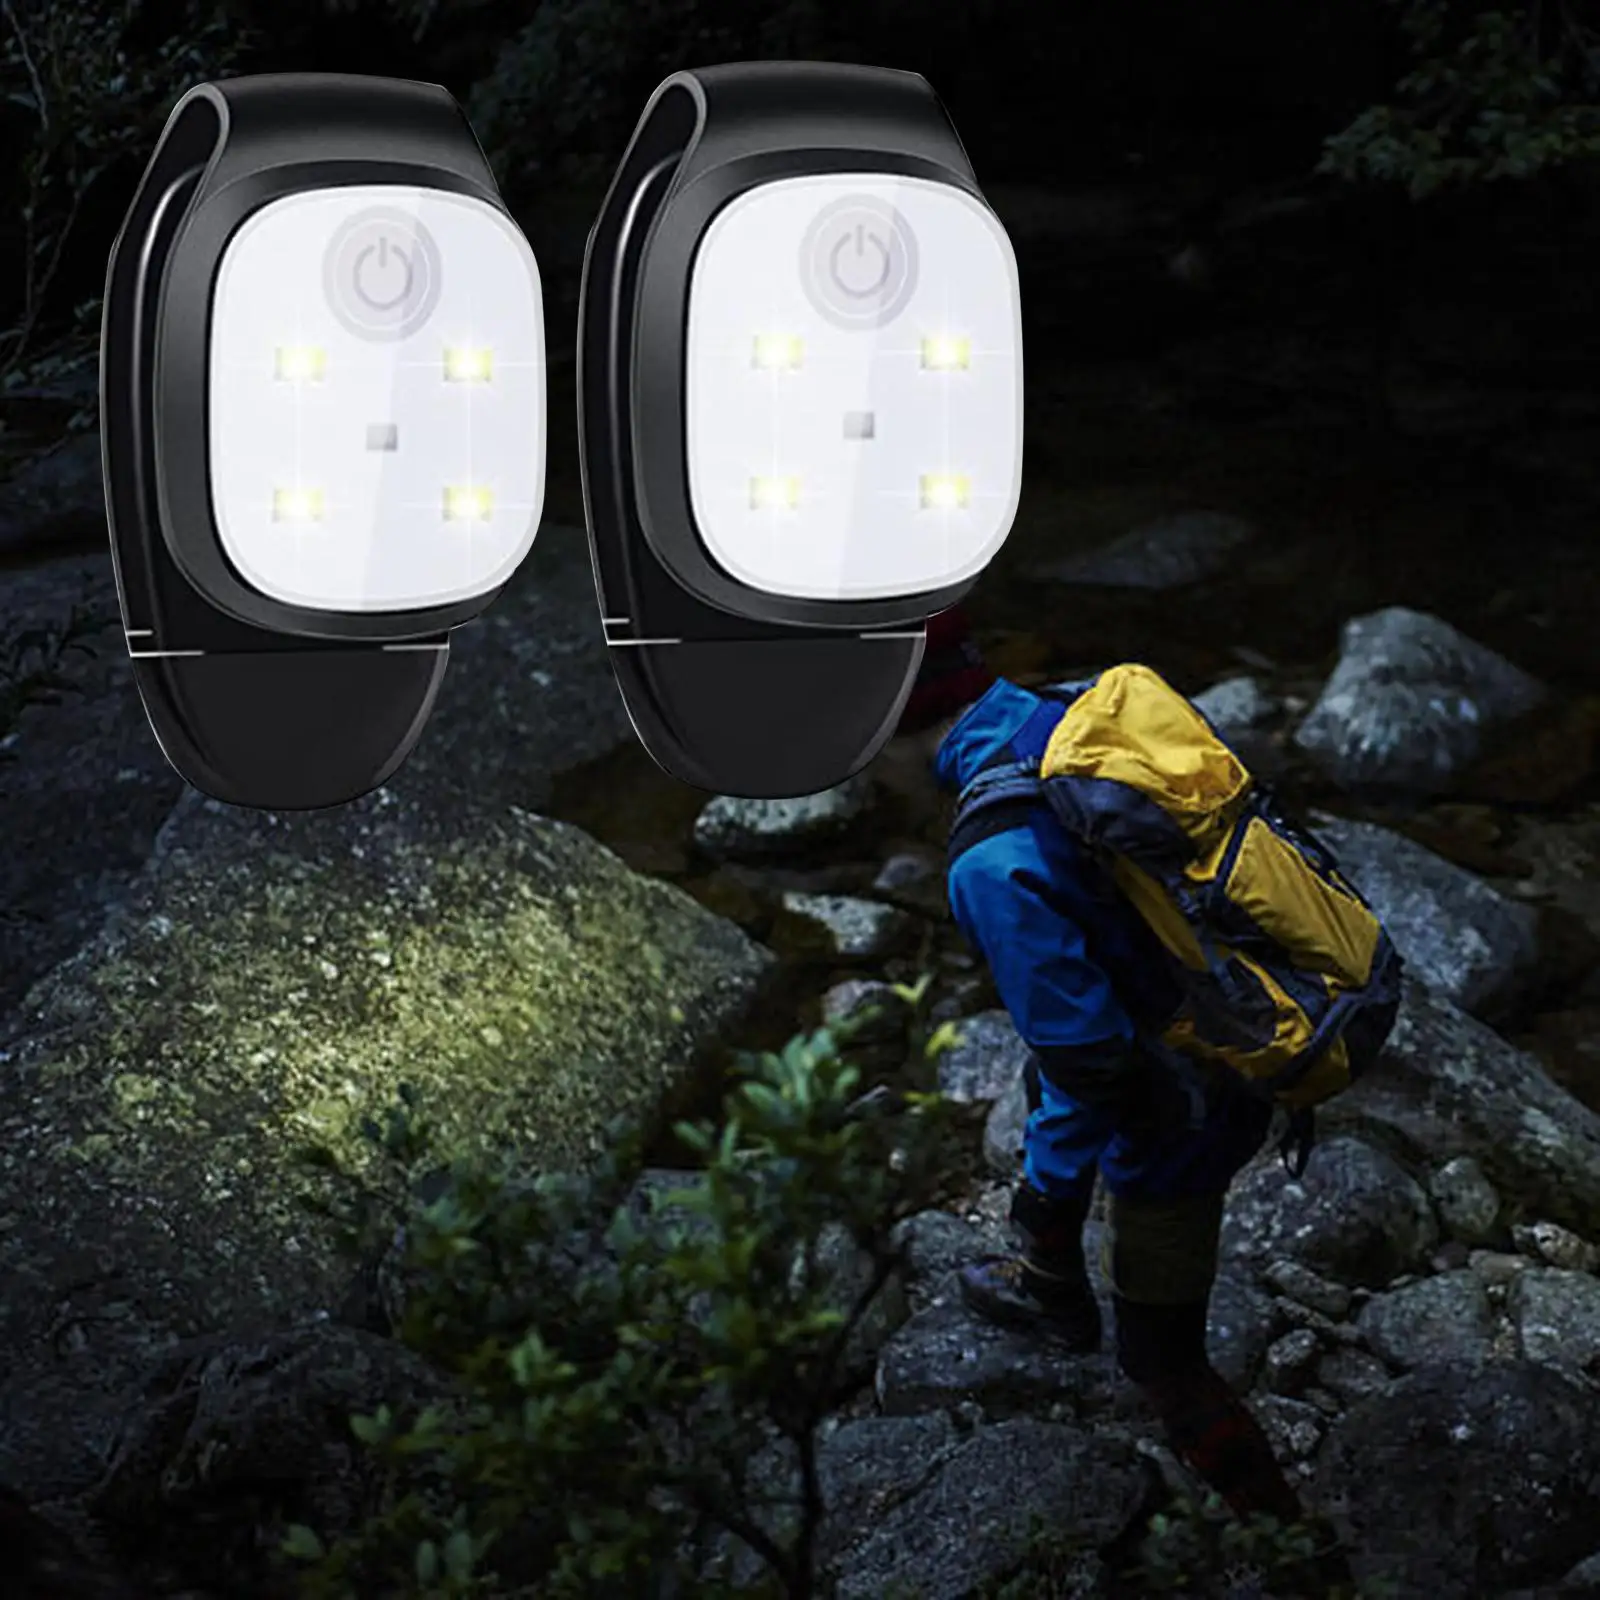 2x LED Flashing Lights 4 Flashing Modes LED Safety Light Clip On for Outdoor Sports Running Hiking Walkers Kids